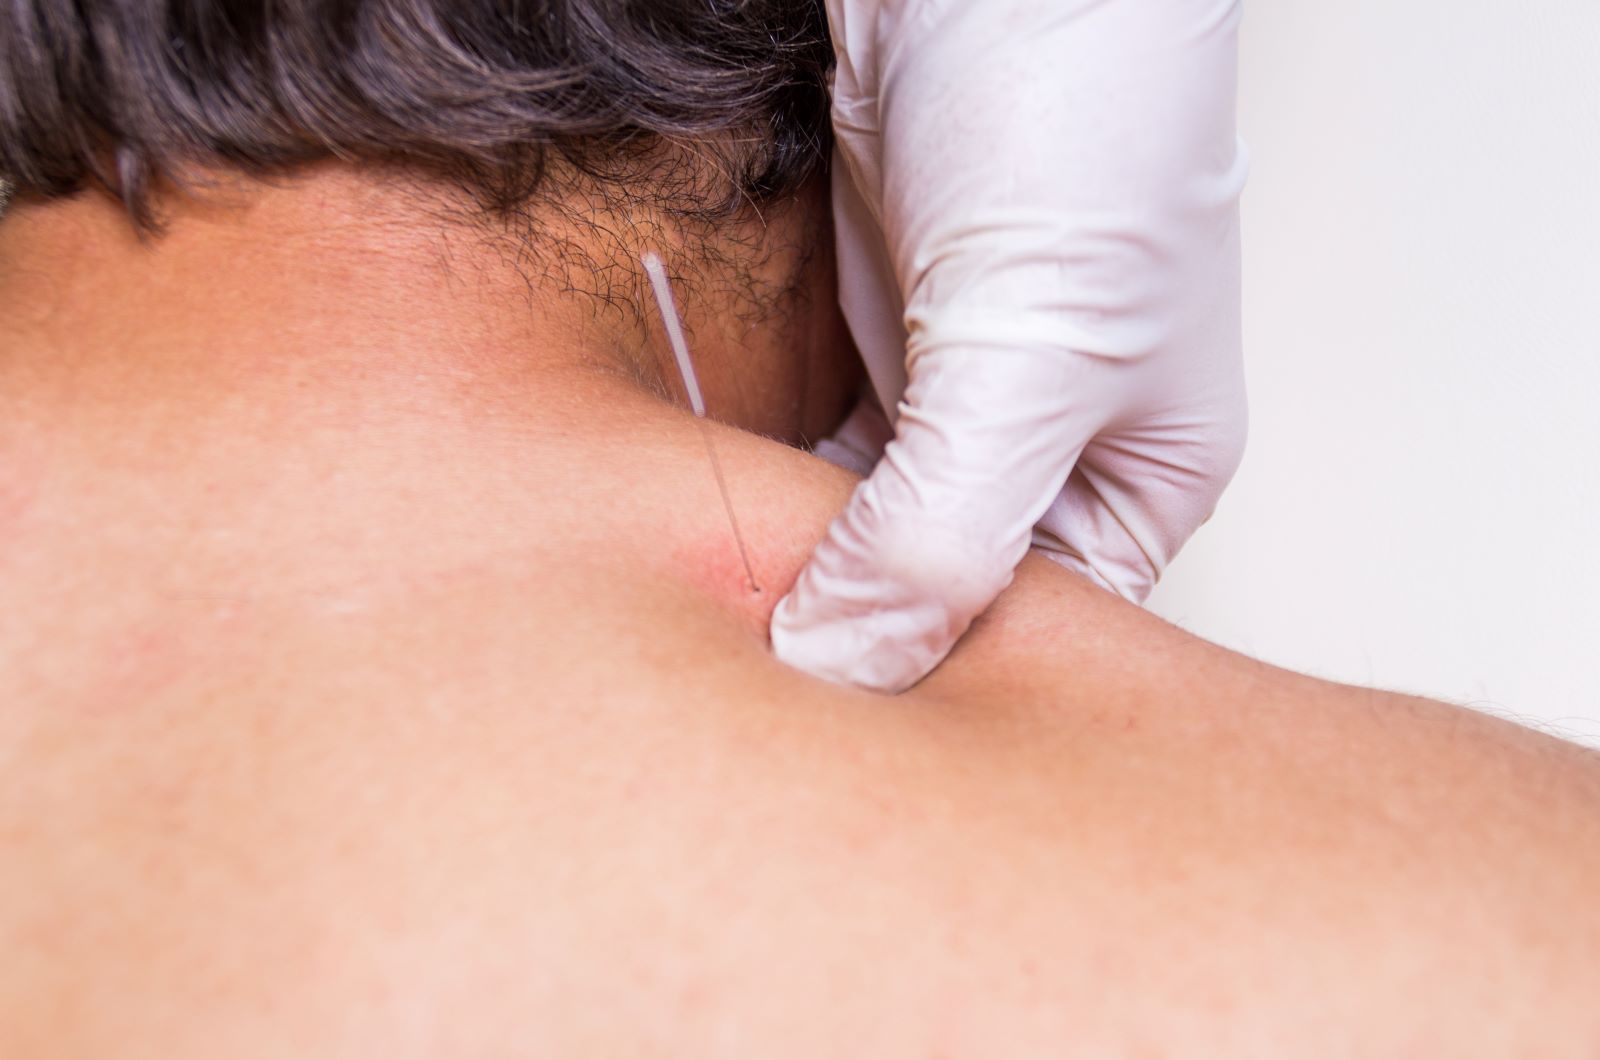 Dry Needling: What Is it and What Does it Do?